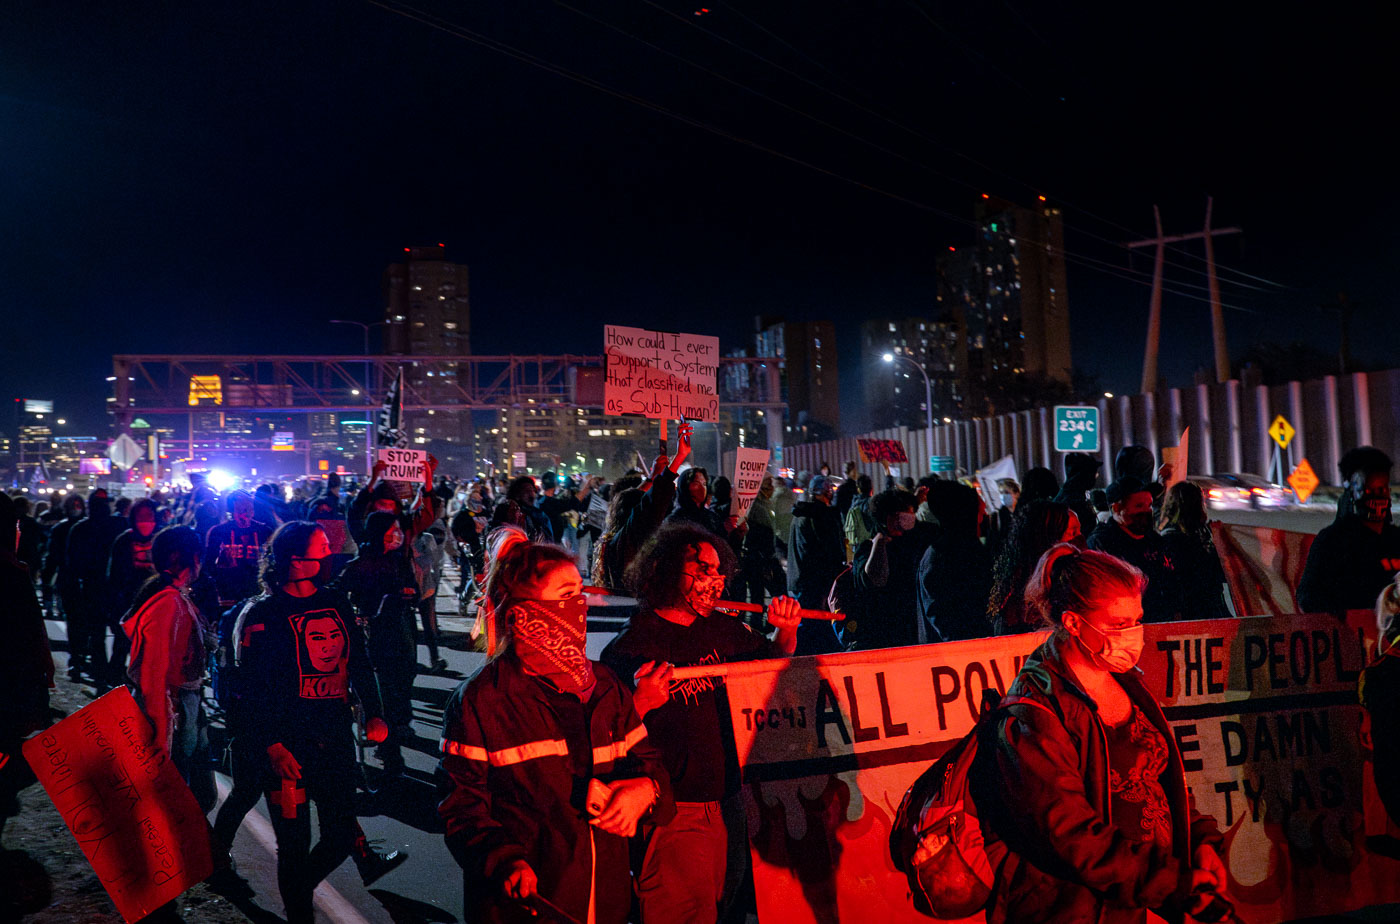 Protesters marching down interstate 94 in Minneapolis